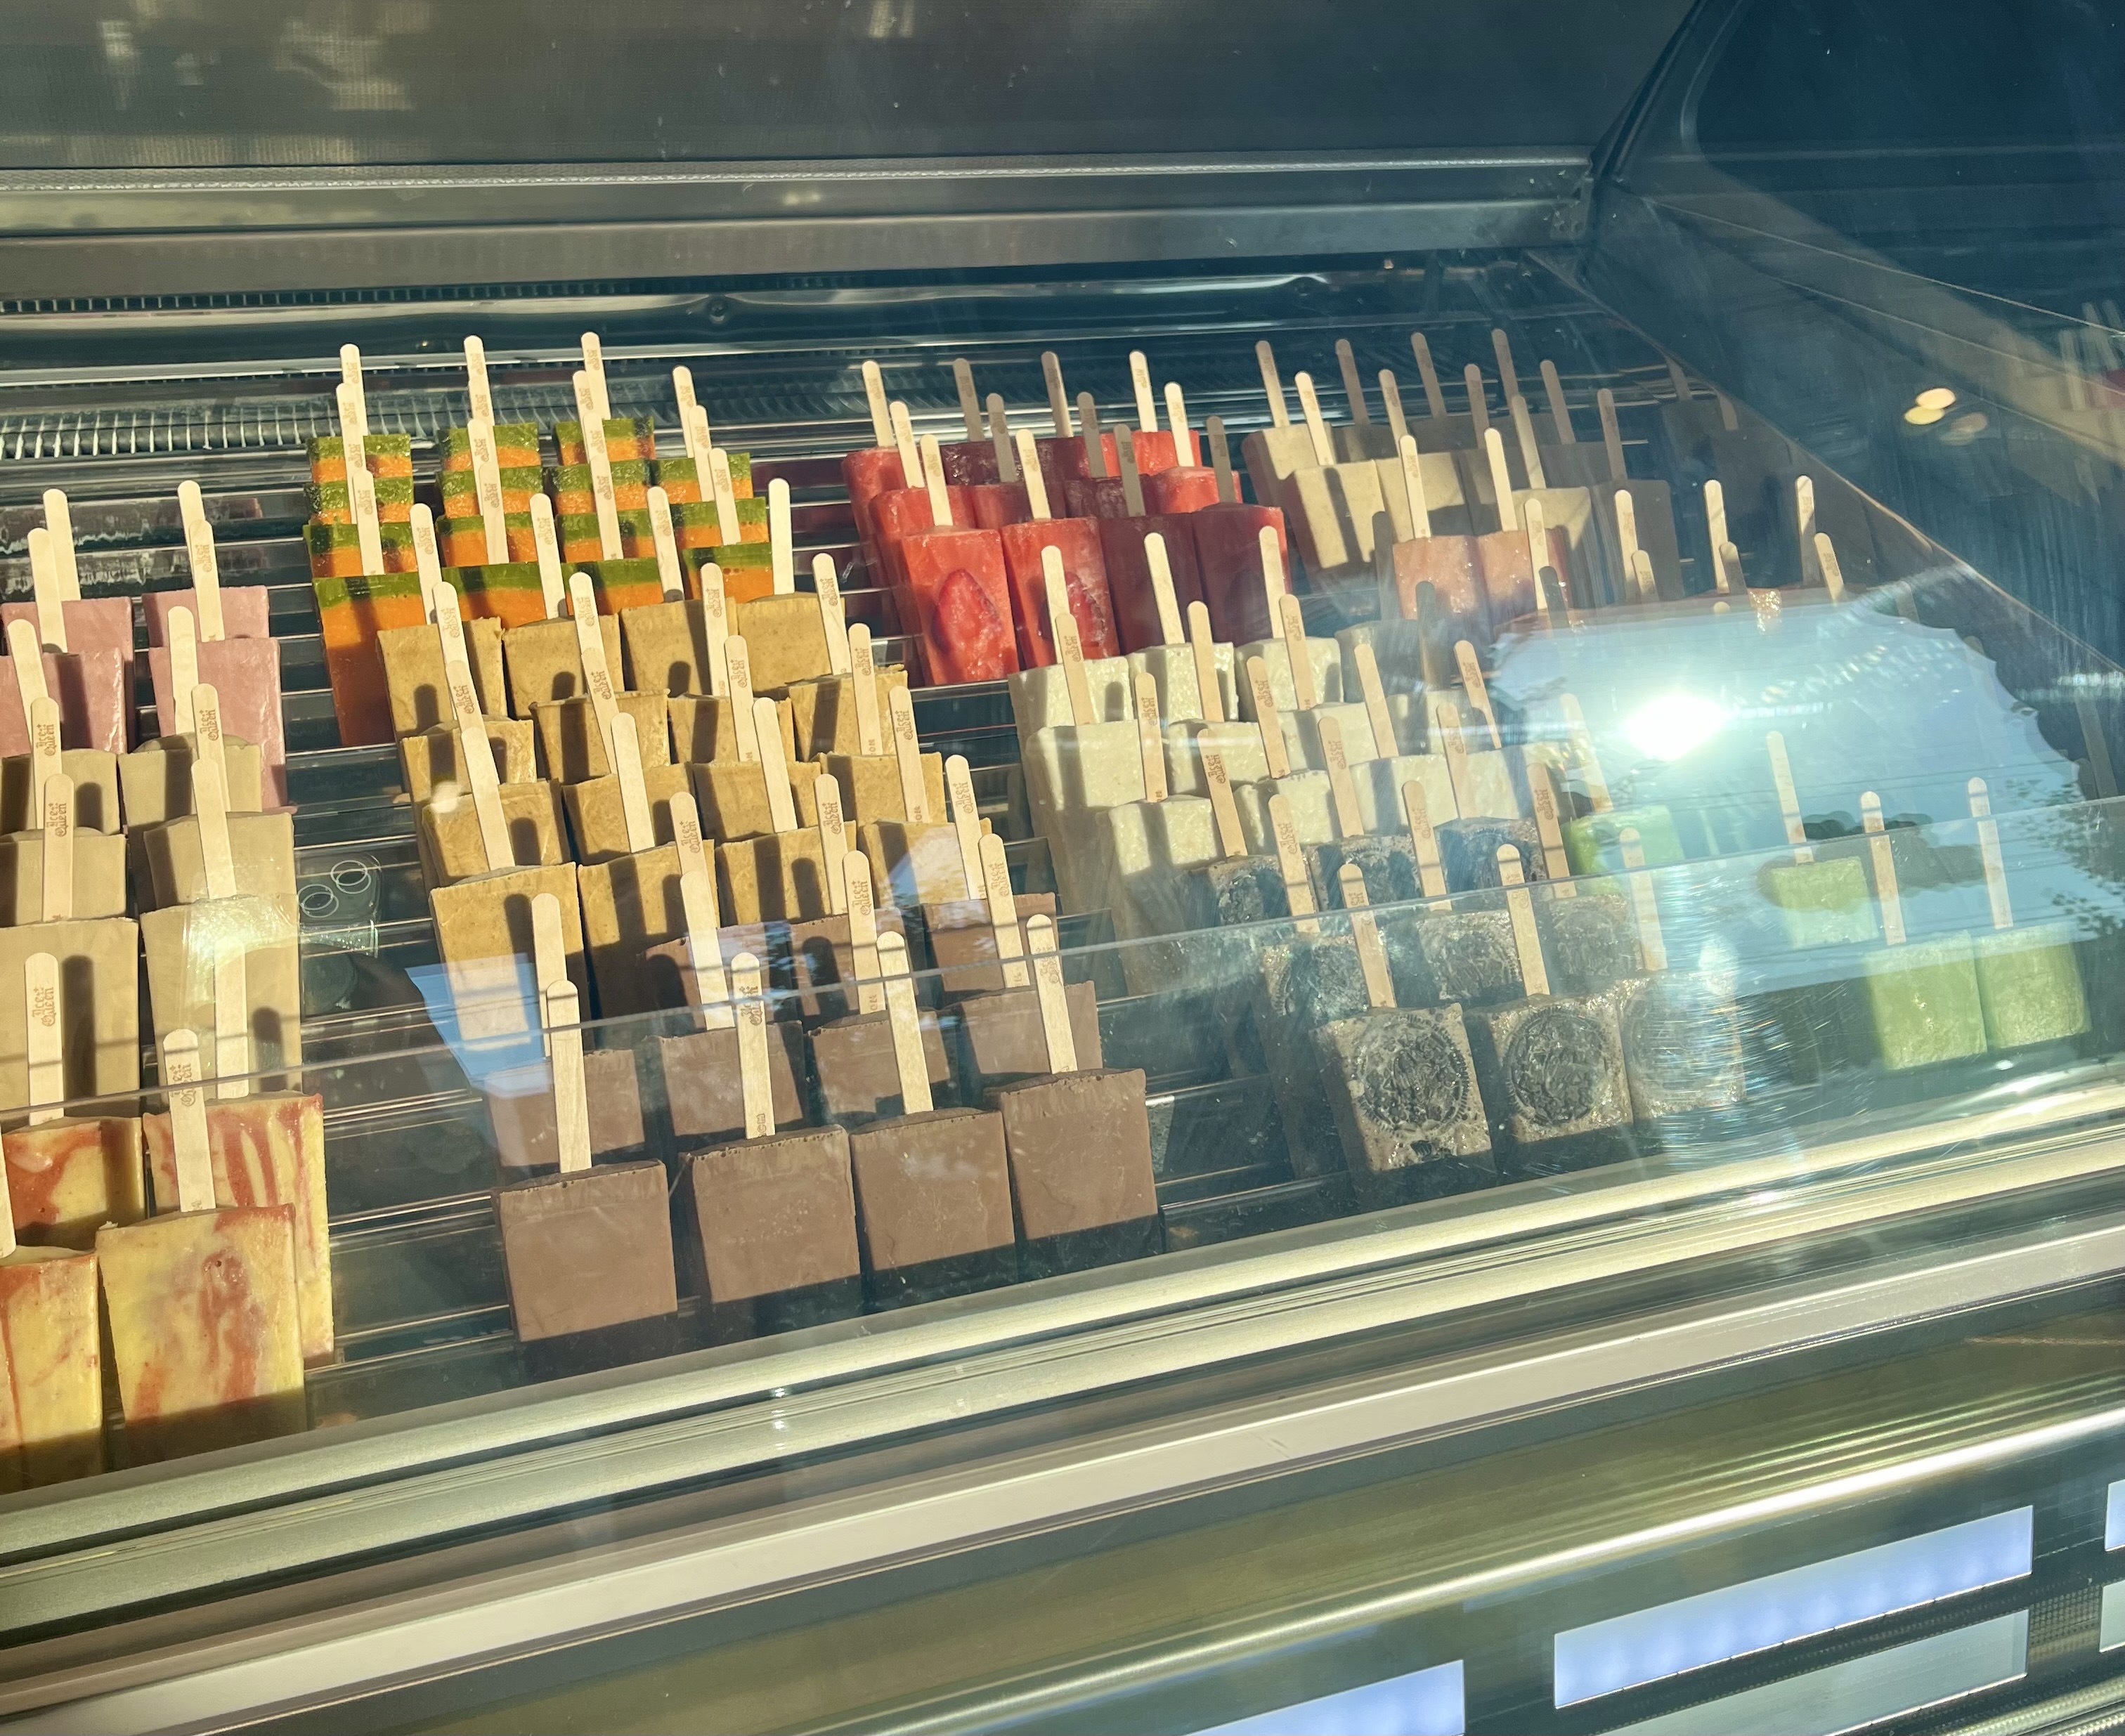 Rows of colorful popsicles sit displayed in a freezer case.